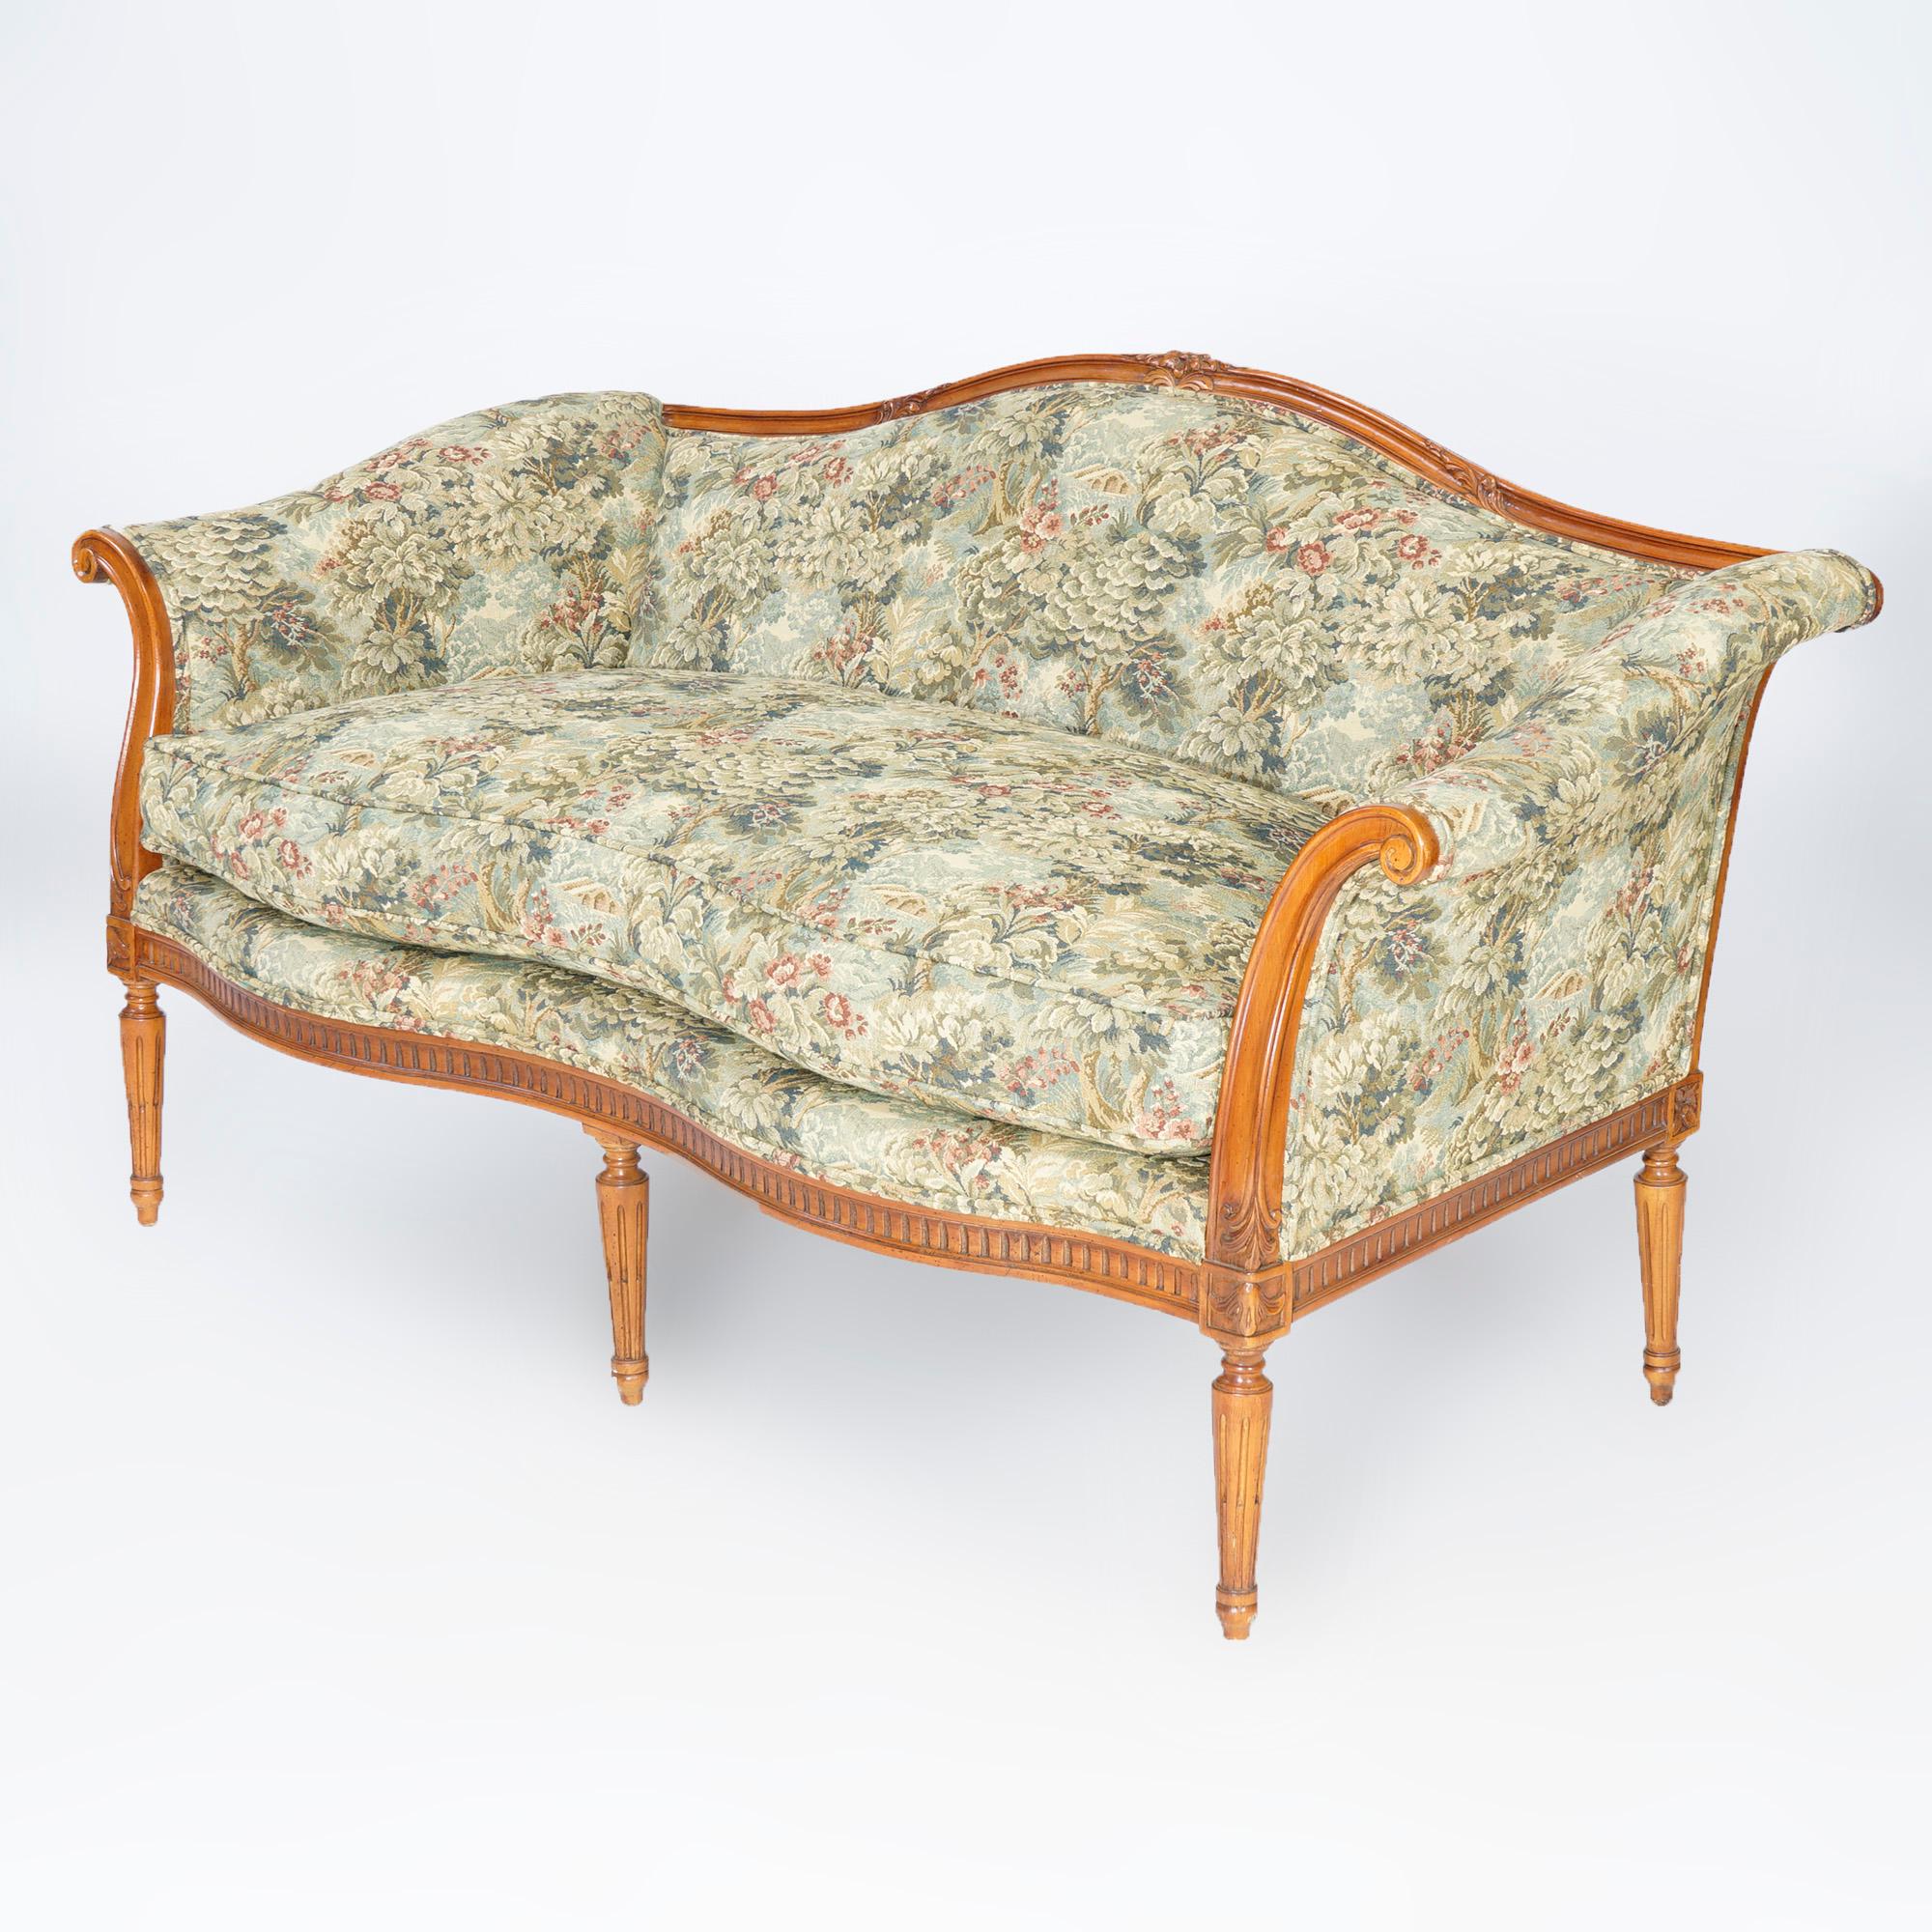 A matching pair of French style floral upholstered settees by John Widdicomb Furniture Company offer serpentine form with scroll form arms, raised on turned, reeded and tapered legs, maker label as photographed, 20th C

Measures- 33''H x 64''W x